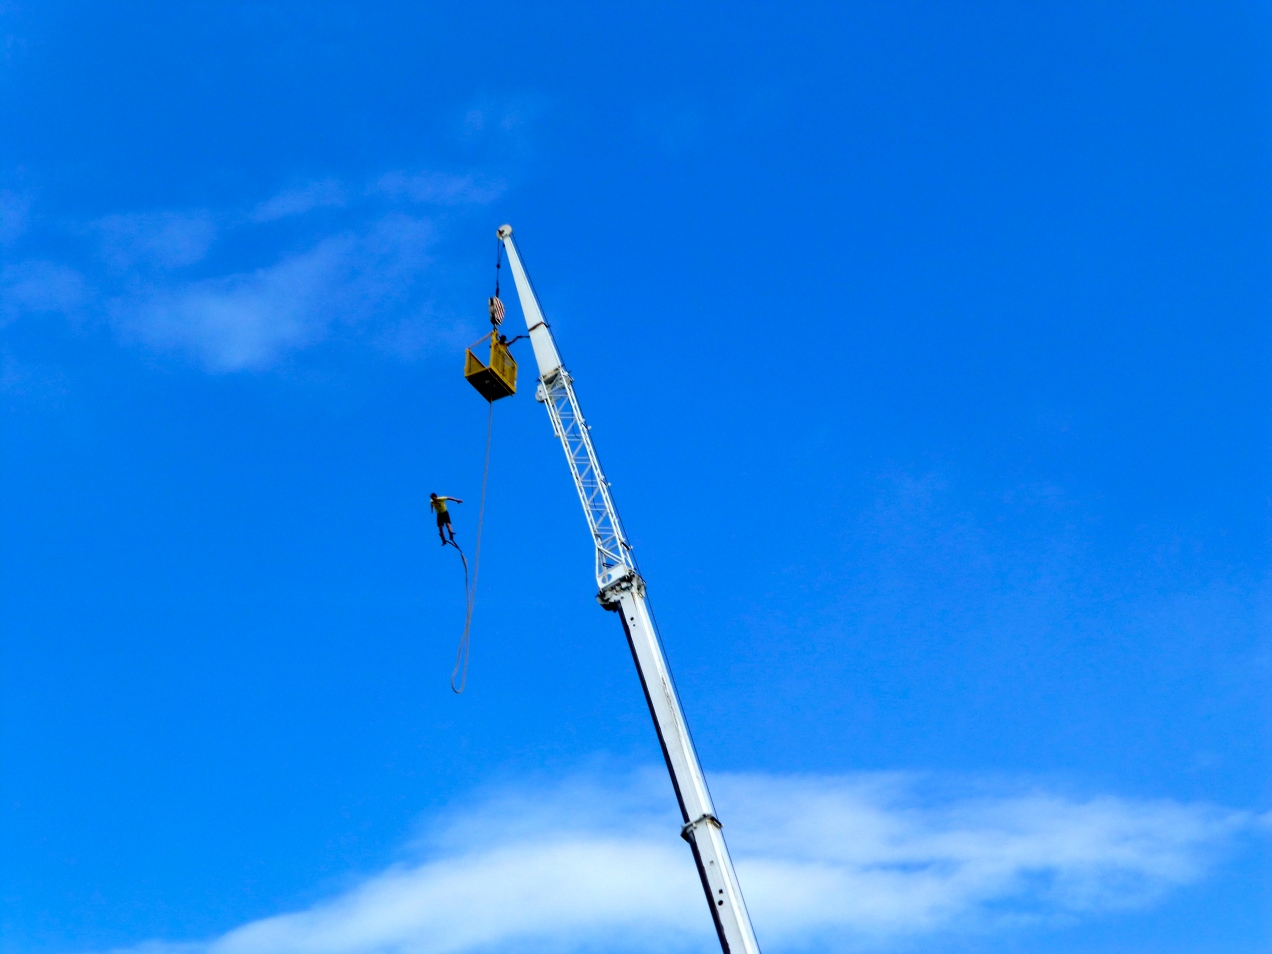 Bungee Jumping in Poland